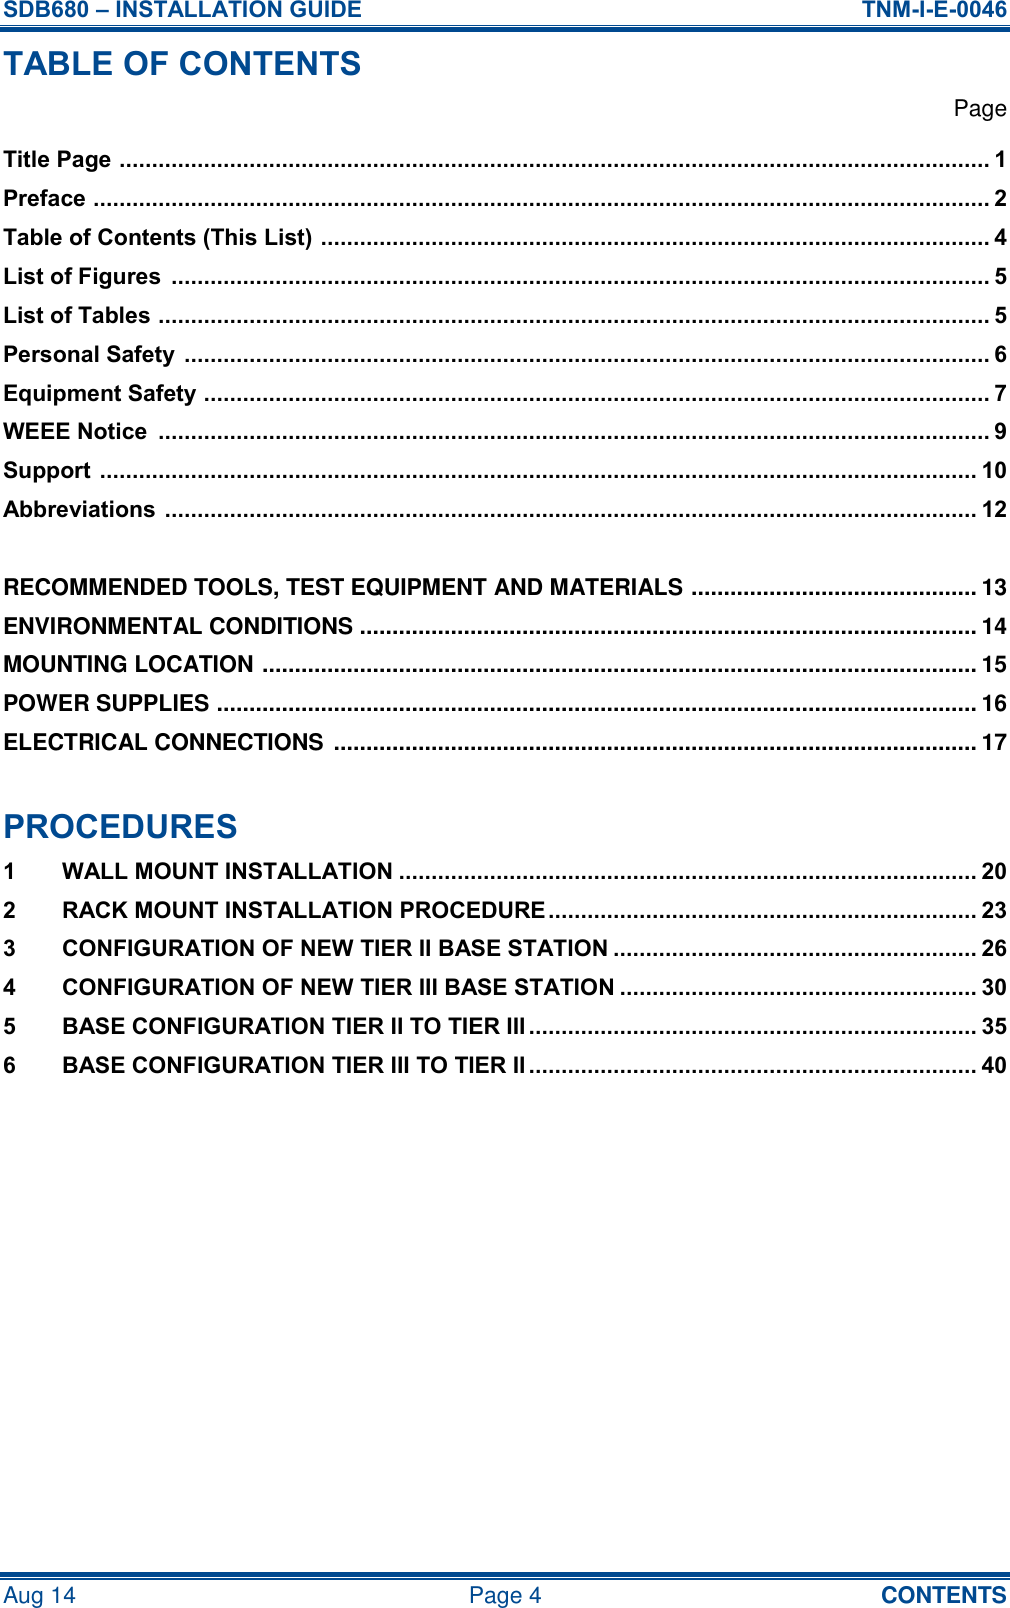 SDB680 – INSTALLATION GUIDE  TNM-I-E-0046 Aug 14  Page 4  CONTENTS TABLE OF CONTENTS   Page Title Page  ...................................................................................................................................... 1 Preface  .......................................................................................................................................... 2 Table of Contents (This List)  ....................................................................................................... 4 List of Figures  .............................................................................................................................. 5 List of Tables  ................................................................................................................................ 5 Personal Safety  ............................................................................................................................ 6 Equipment Safety  ......................................................................................................................... 7 WEEE Notice  ................................................................................................................................ 9 Support  ....................................................................................................................................... 10 Abbreviations  ............................................................................................................................. 12  RECOMMENDED TOOLS, TEST EQUIPMENT AND MATERIALS  ............................................ 13 ENVIRONMENTAL CONDITIONS ............................................................................................... 14 MOUNTING LOCATION  .............................................................................................................. 15 POWER SUPPLIES  ..................................................................................................................... 16 ELECTRICAL CONNECTIONS  ................................................................................................... 17  PROCEDURES 1 WALL MOUNT INSTALLATION ......................................................................................... 20 2 RACK MOUNT INSTALLATION PROCEDURE .................................................................. 23 3 CONFIGURATION OF NEW TIER II BASE STATION ........................................................ 26 4 CONFIGURATION OF NEW TIER III BASE STATION ....................................................... 30 5 BASE CONFIGURATION TIER II TO TIER III ..................................................................... 35 6 BASE CONFIGURATION TIER III TO TIER II ..................................................................... 40     